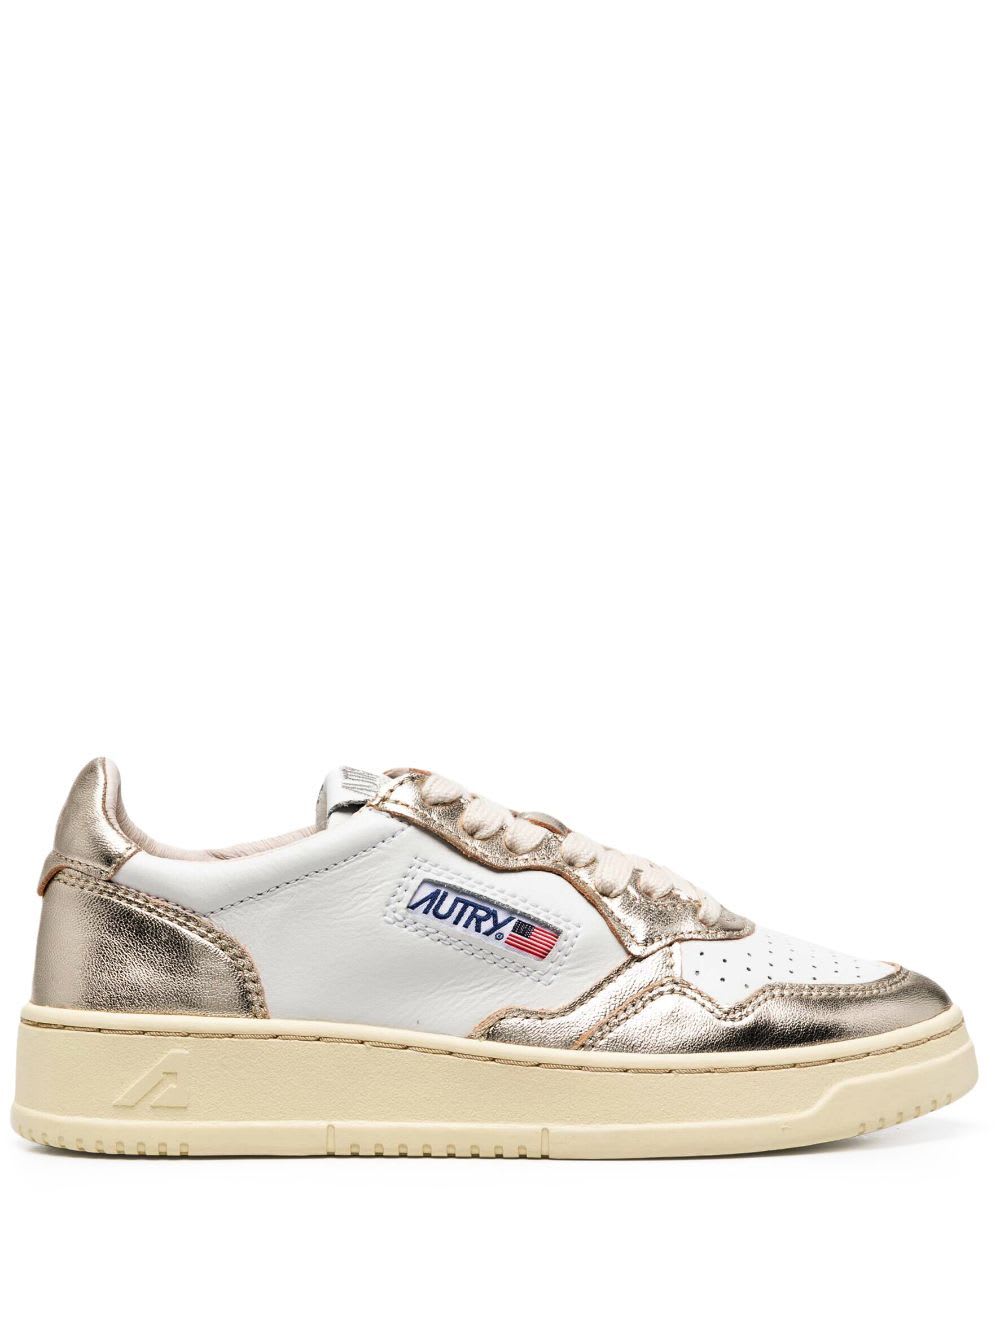 Autry Medalist Low Sneakers In White Platinum